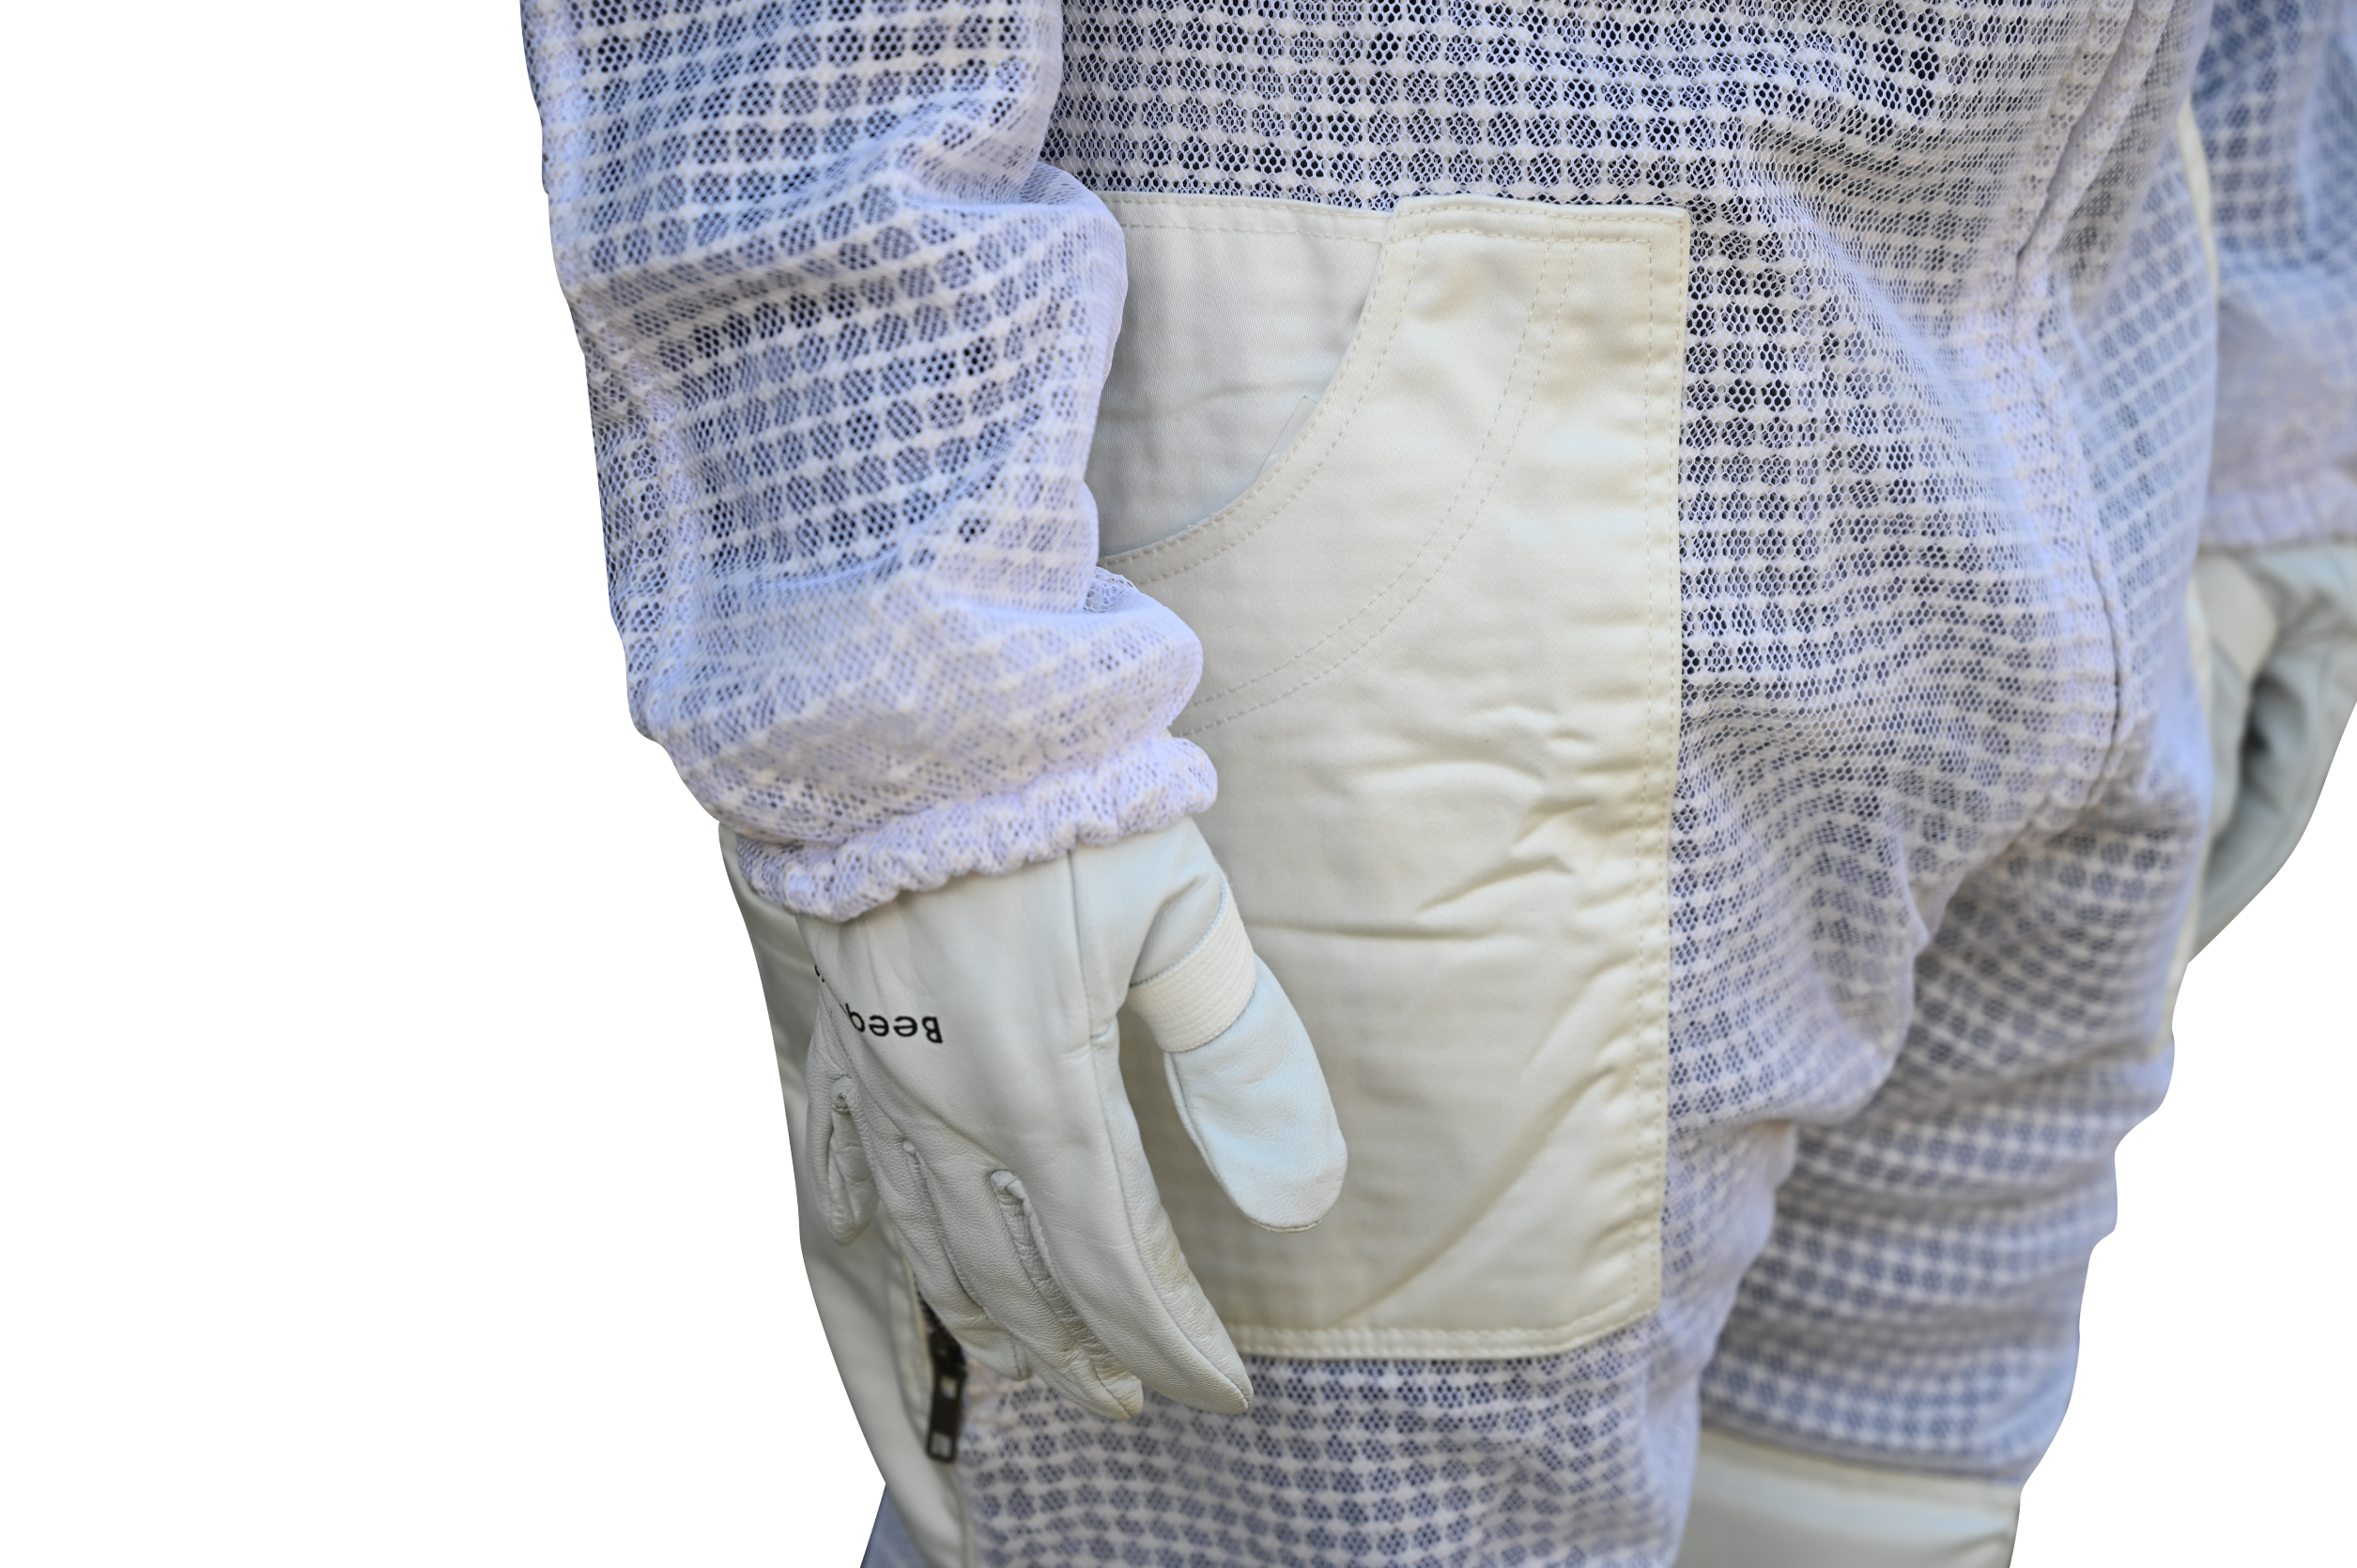 3 Layer Ventilated Bee Suit (Side Pose) - Pocket and Gloves